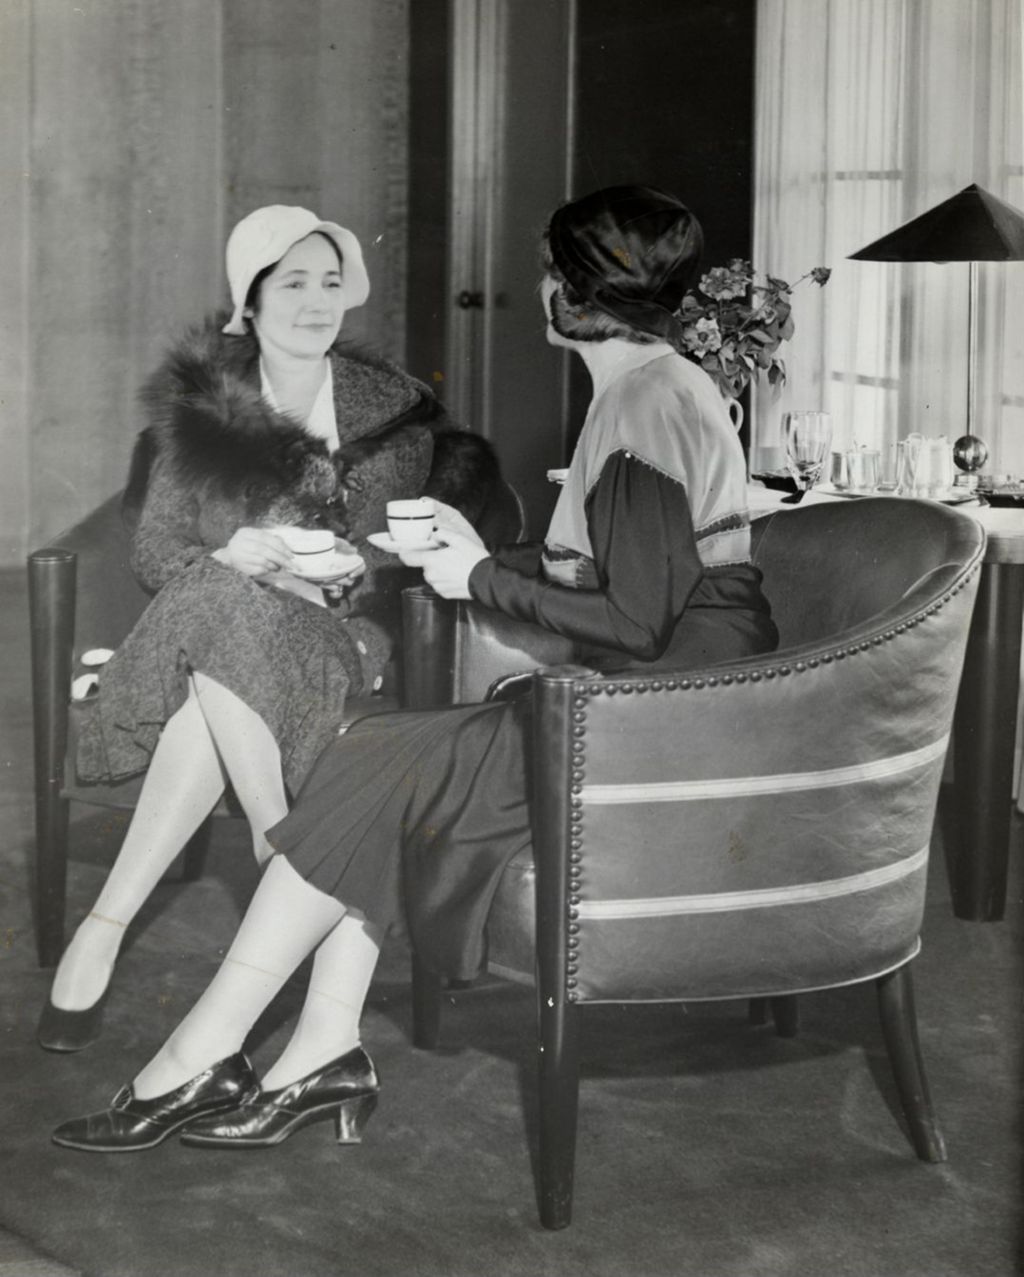 Unknown photograph of two women having tea at A Century of Progress International Exposition.